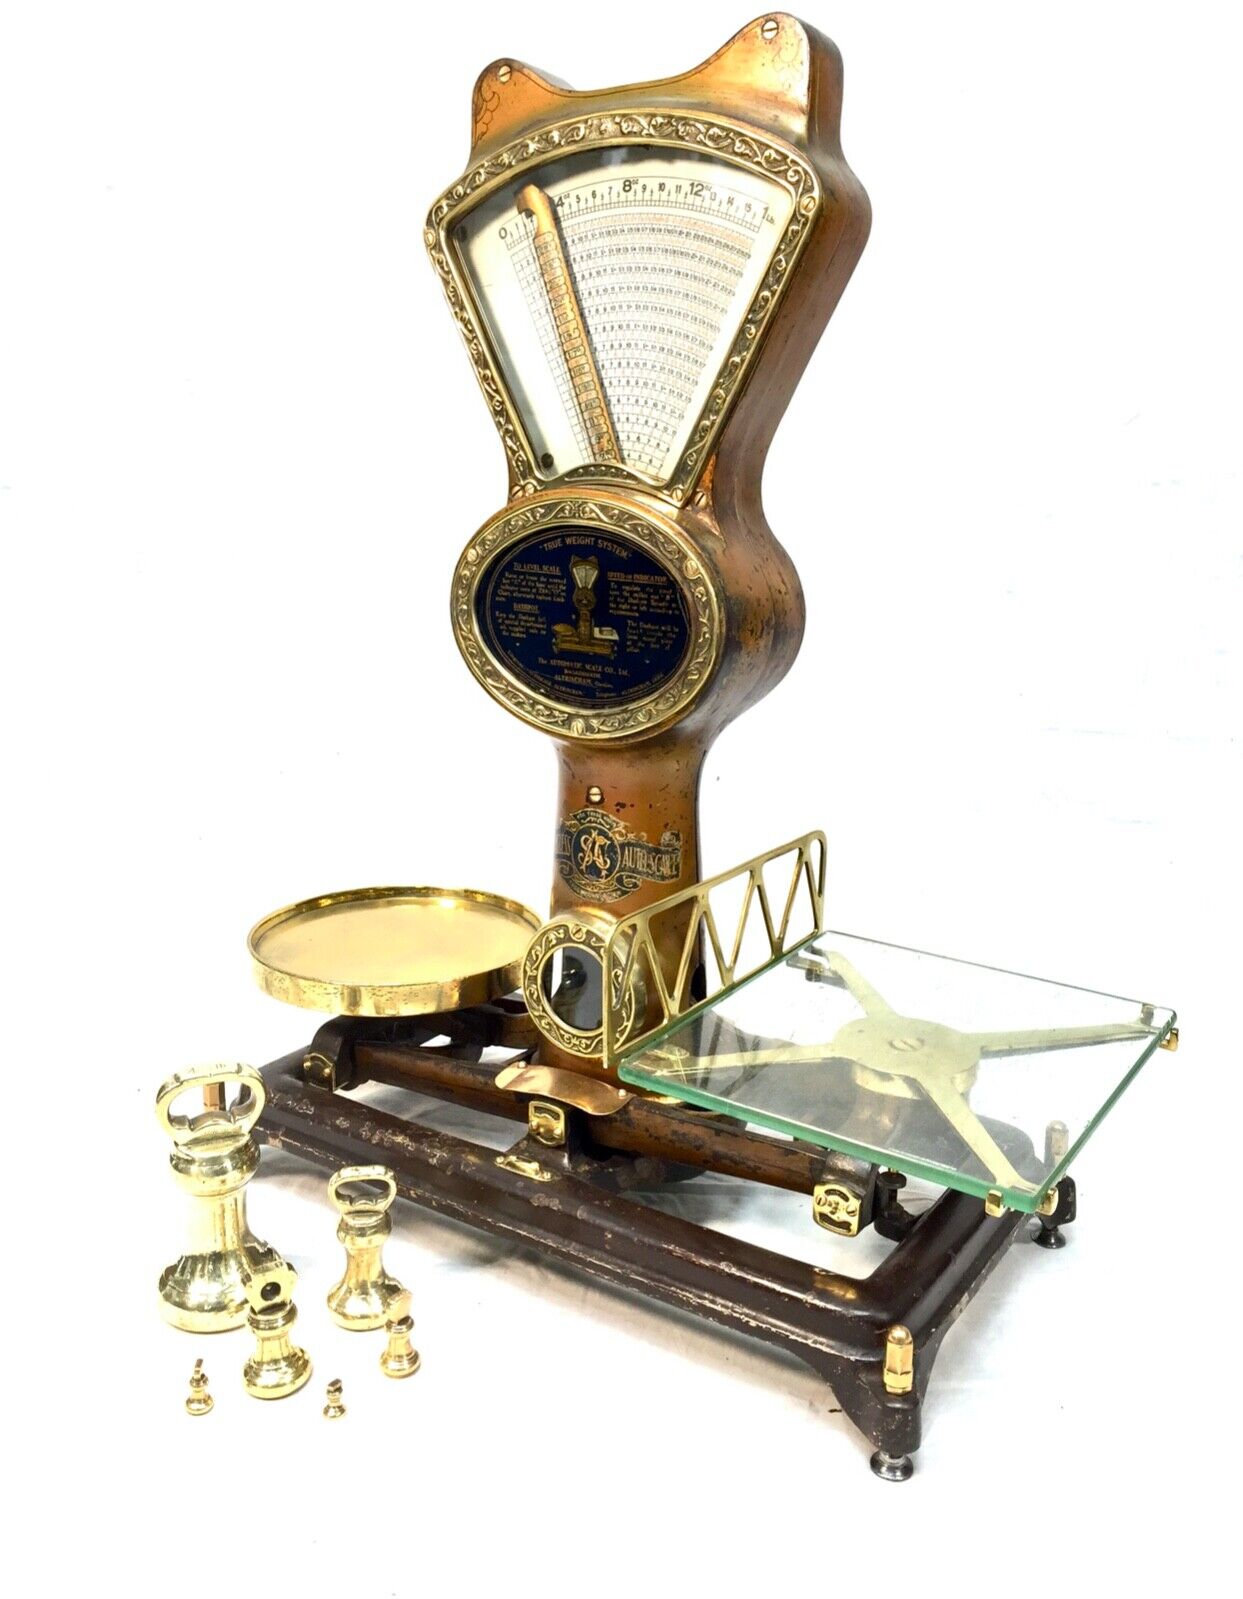 Antique Large Shop Used Scales by The Automatic Scale Company Ltd / Brass c.1900